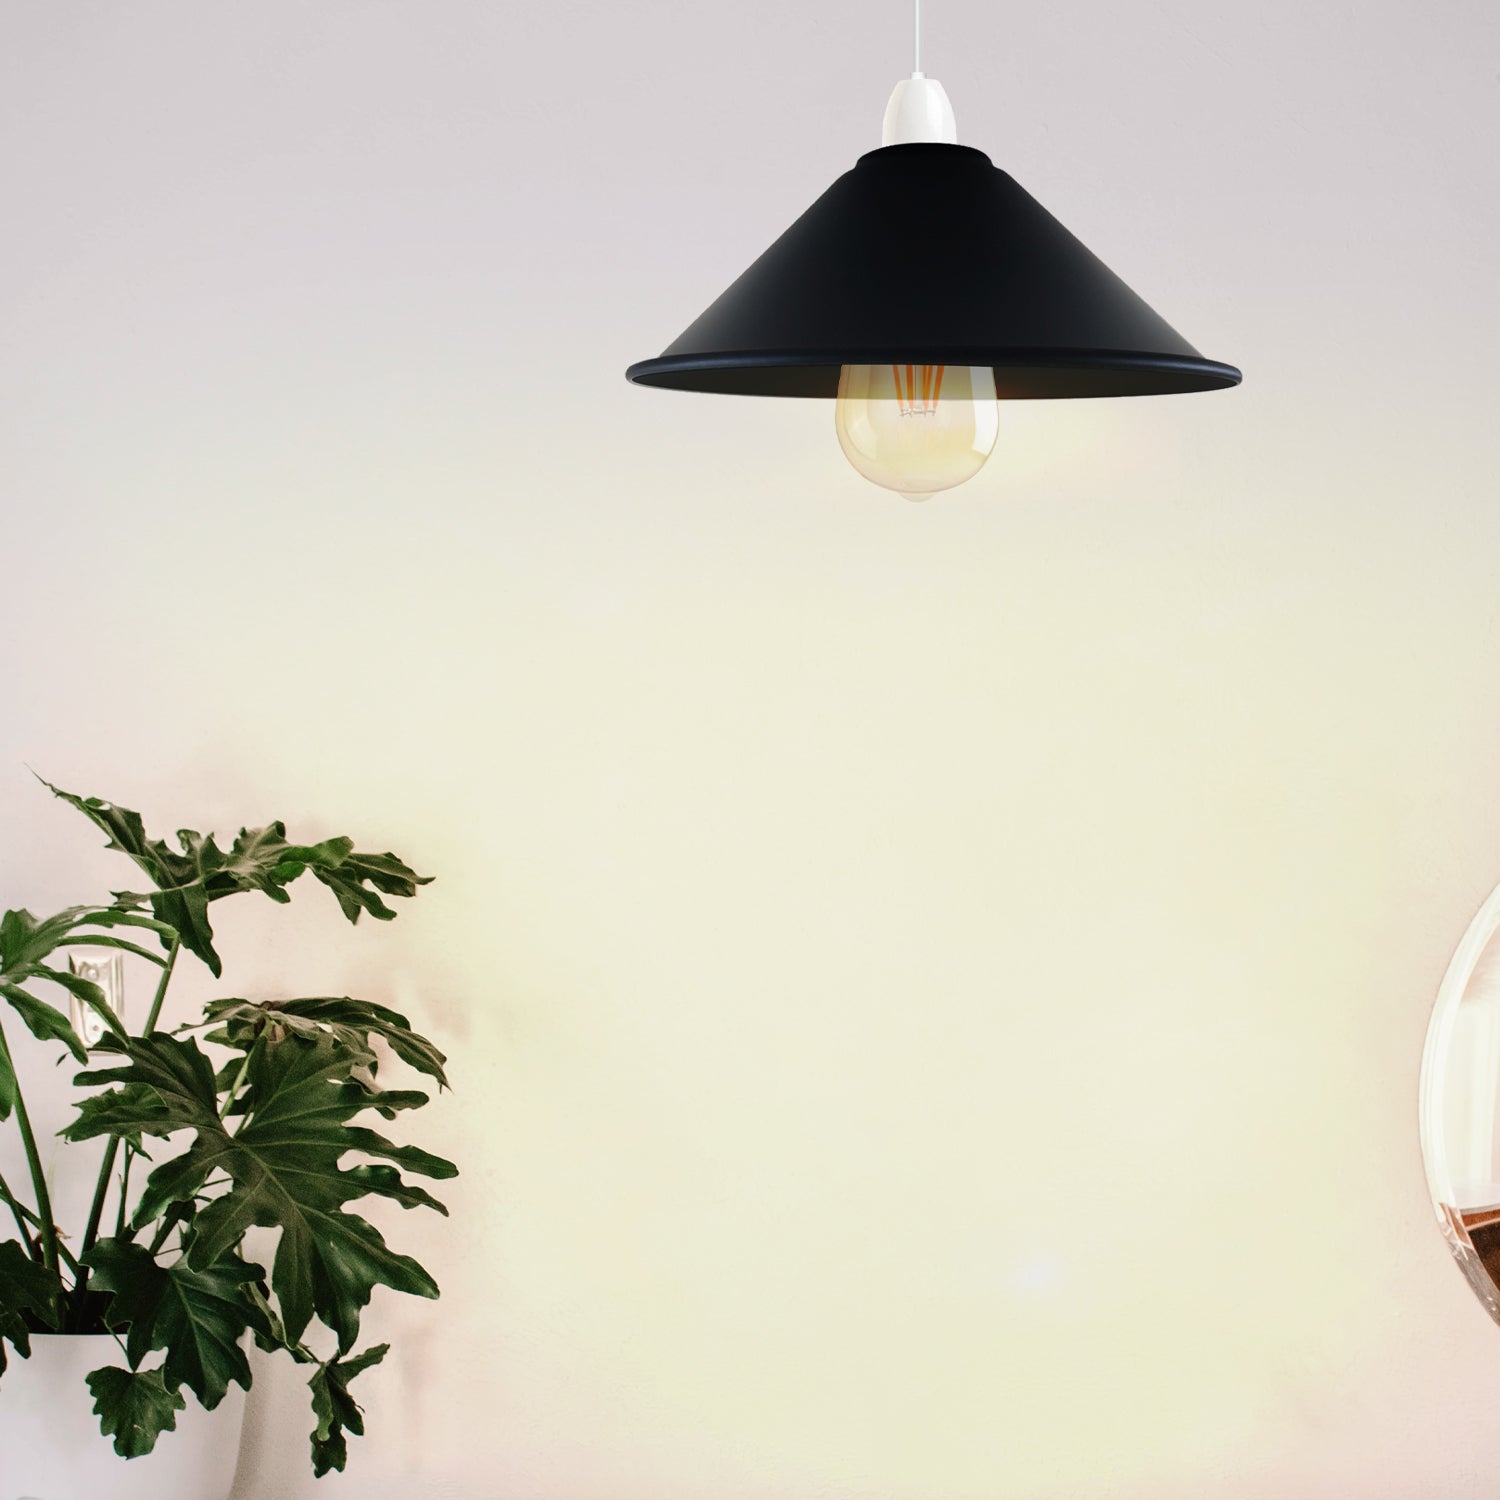 Blacl Kitchen Lighting- easy fit lamp shade